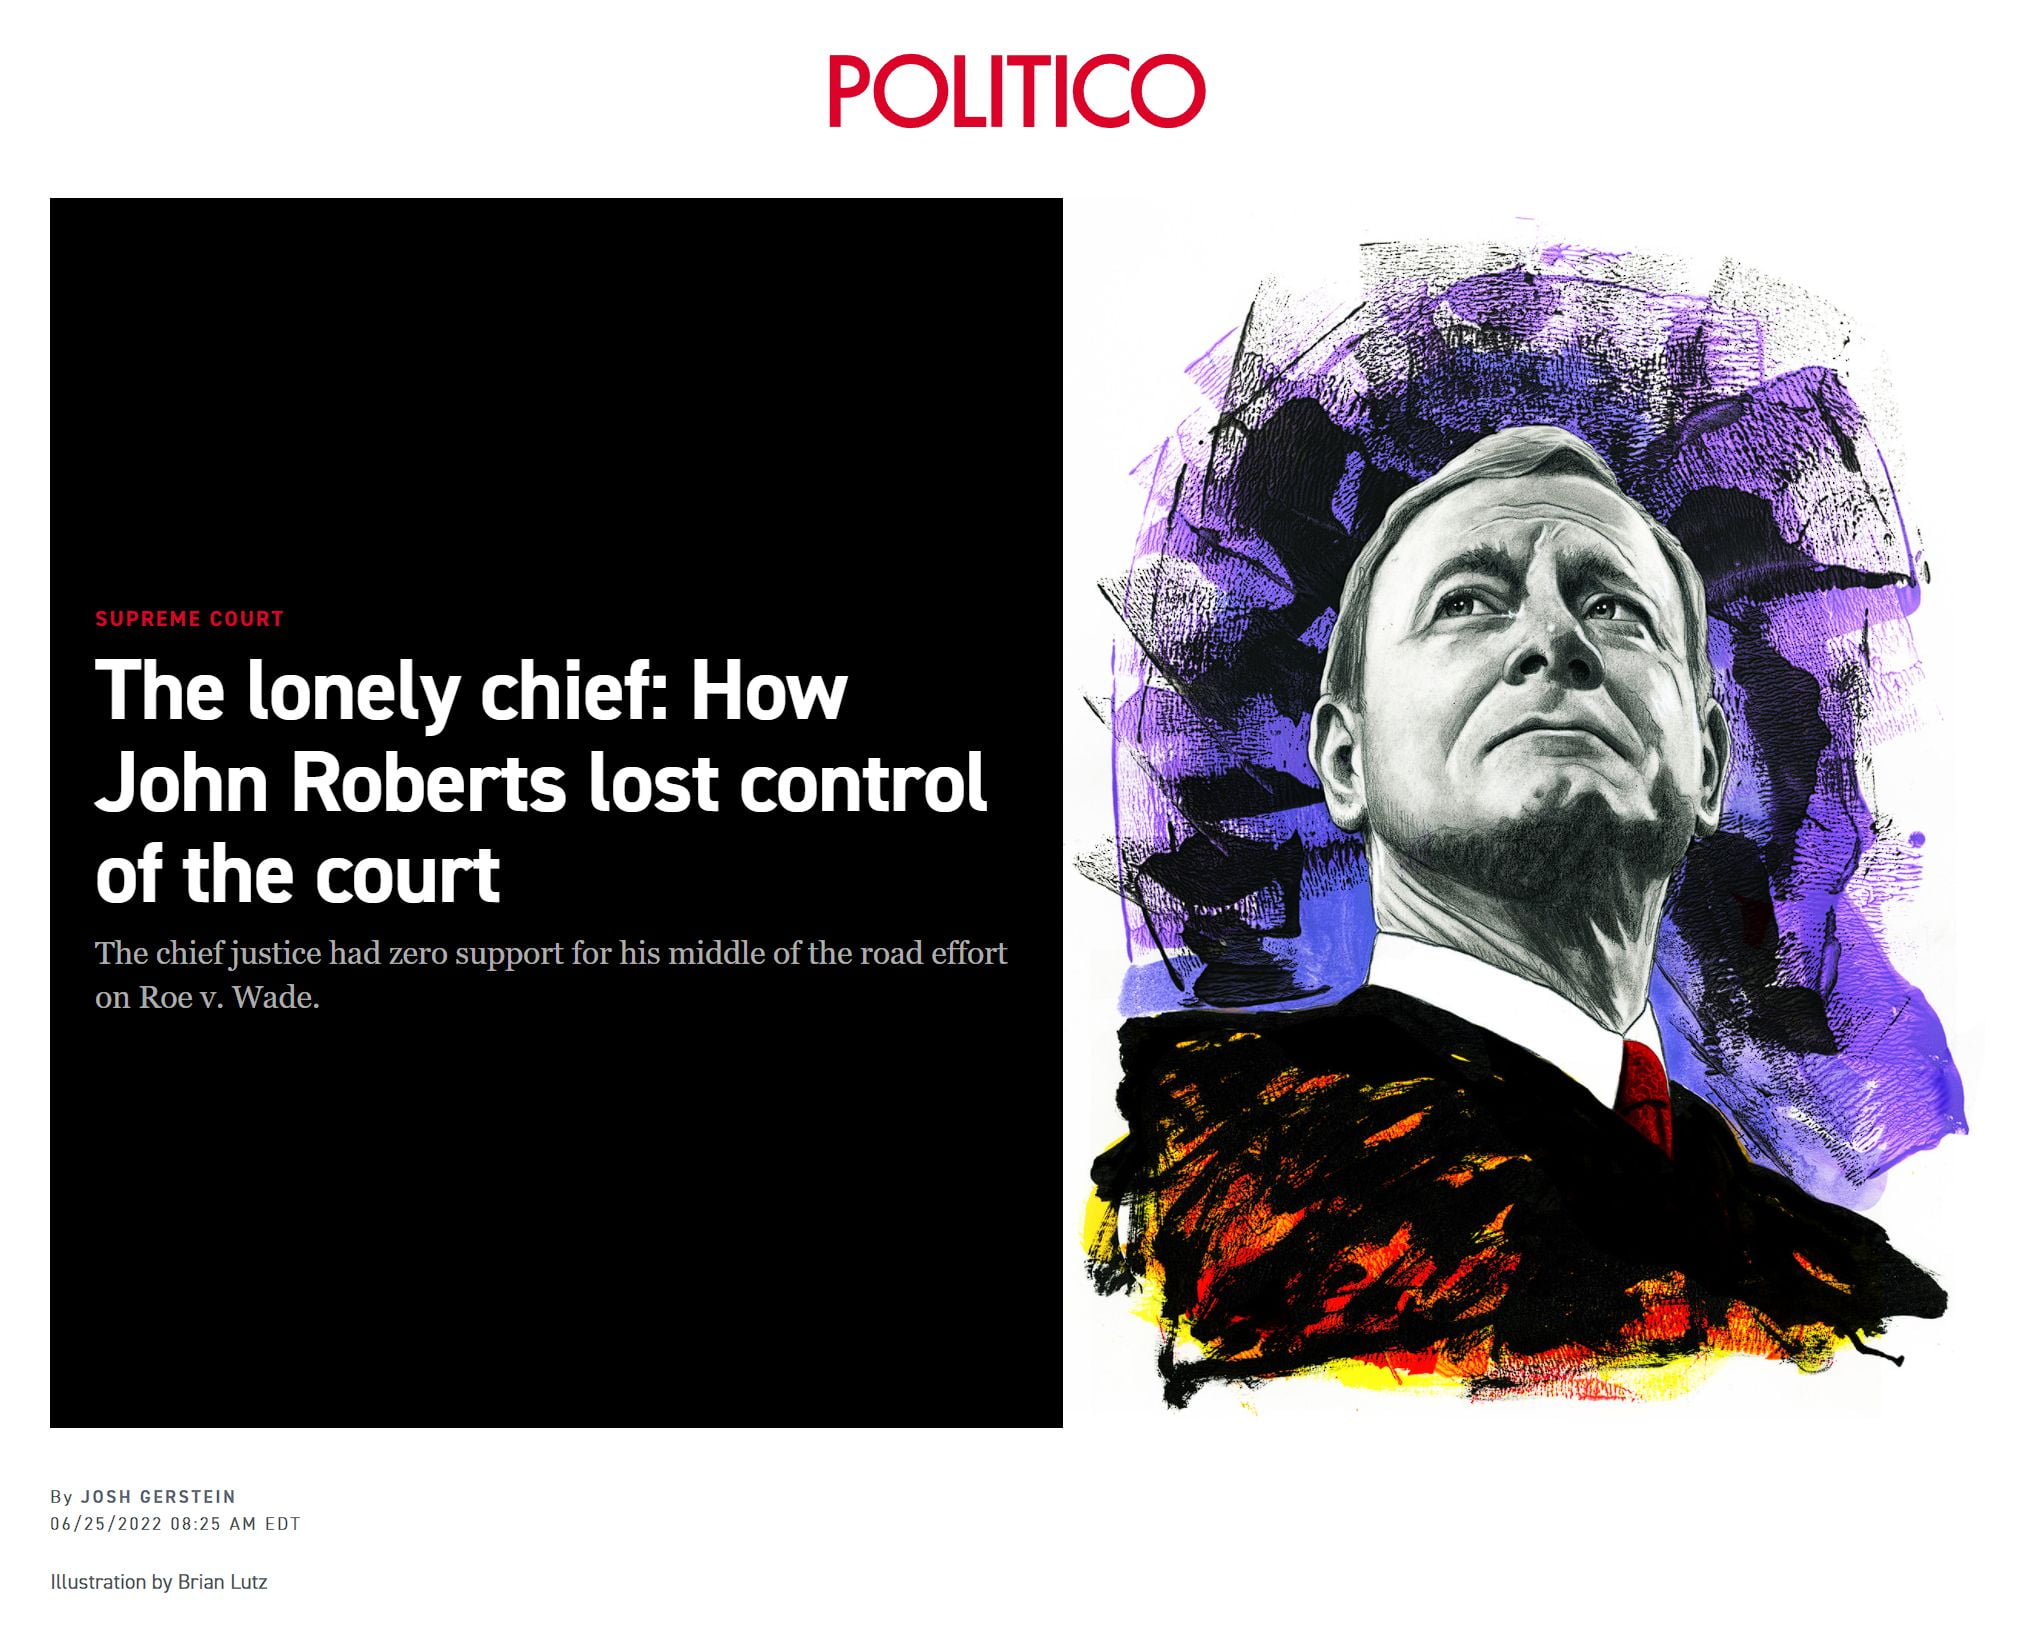 How the fake conservative John Roberts became irrelevant